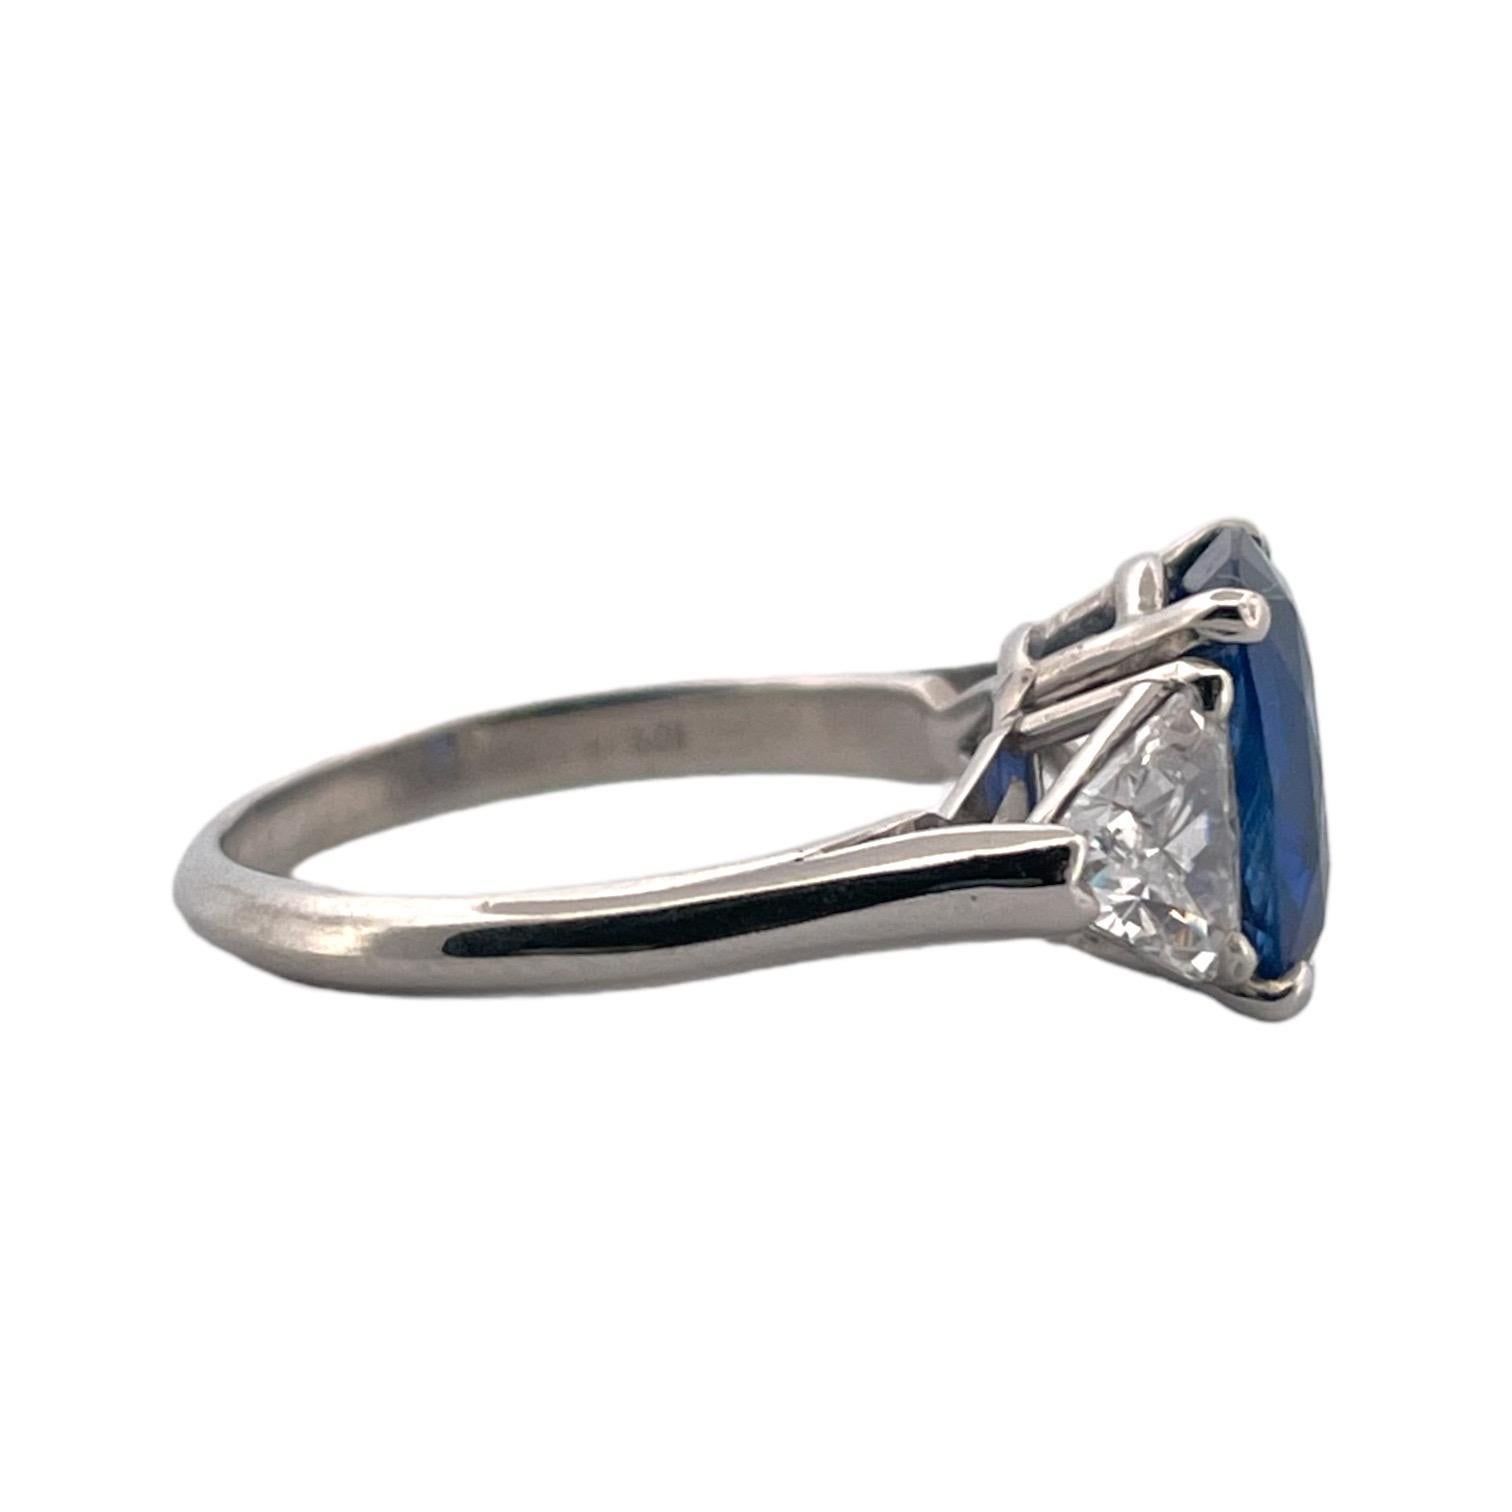 A luxurious 2.59 Carat Ceylon sapphire ring, heated to perfection, paired with 1.5 Carat of D color, VS clarity trillion cut diamonds. Set in a platinum band, size 5.5, showcasing a stunning cornflower blue hue, this ring is a treasure of